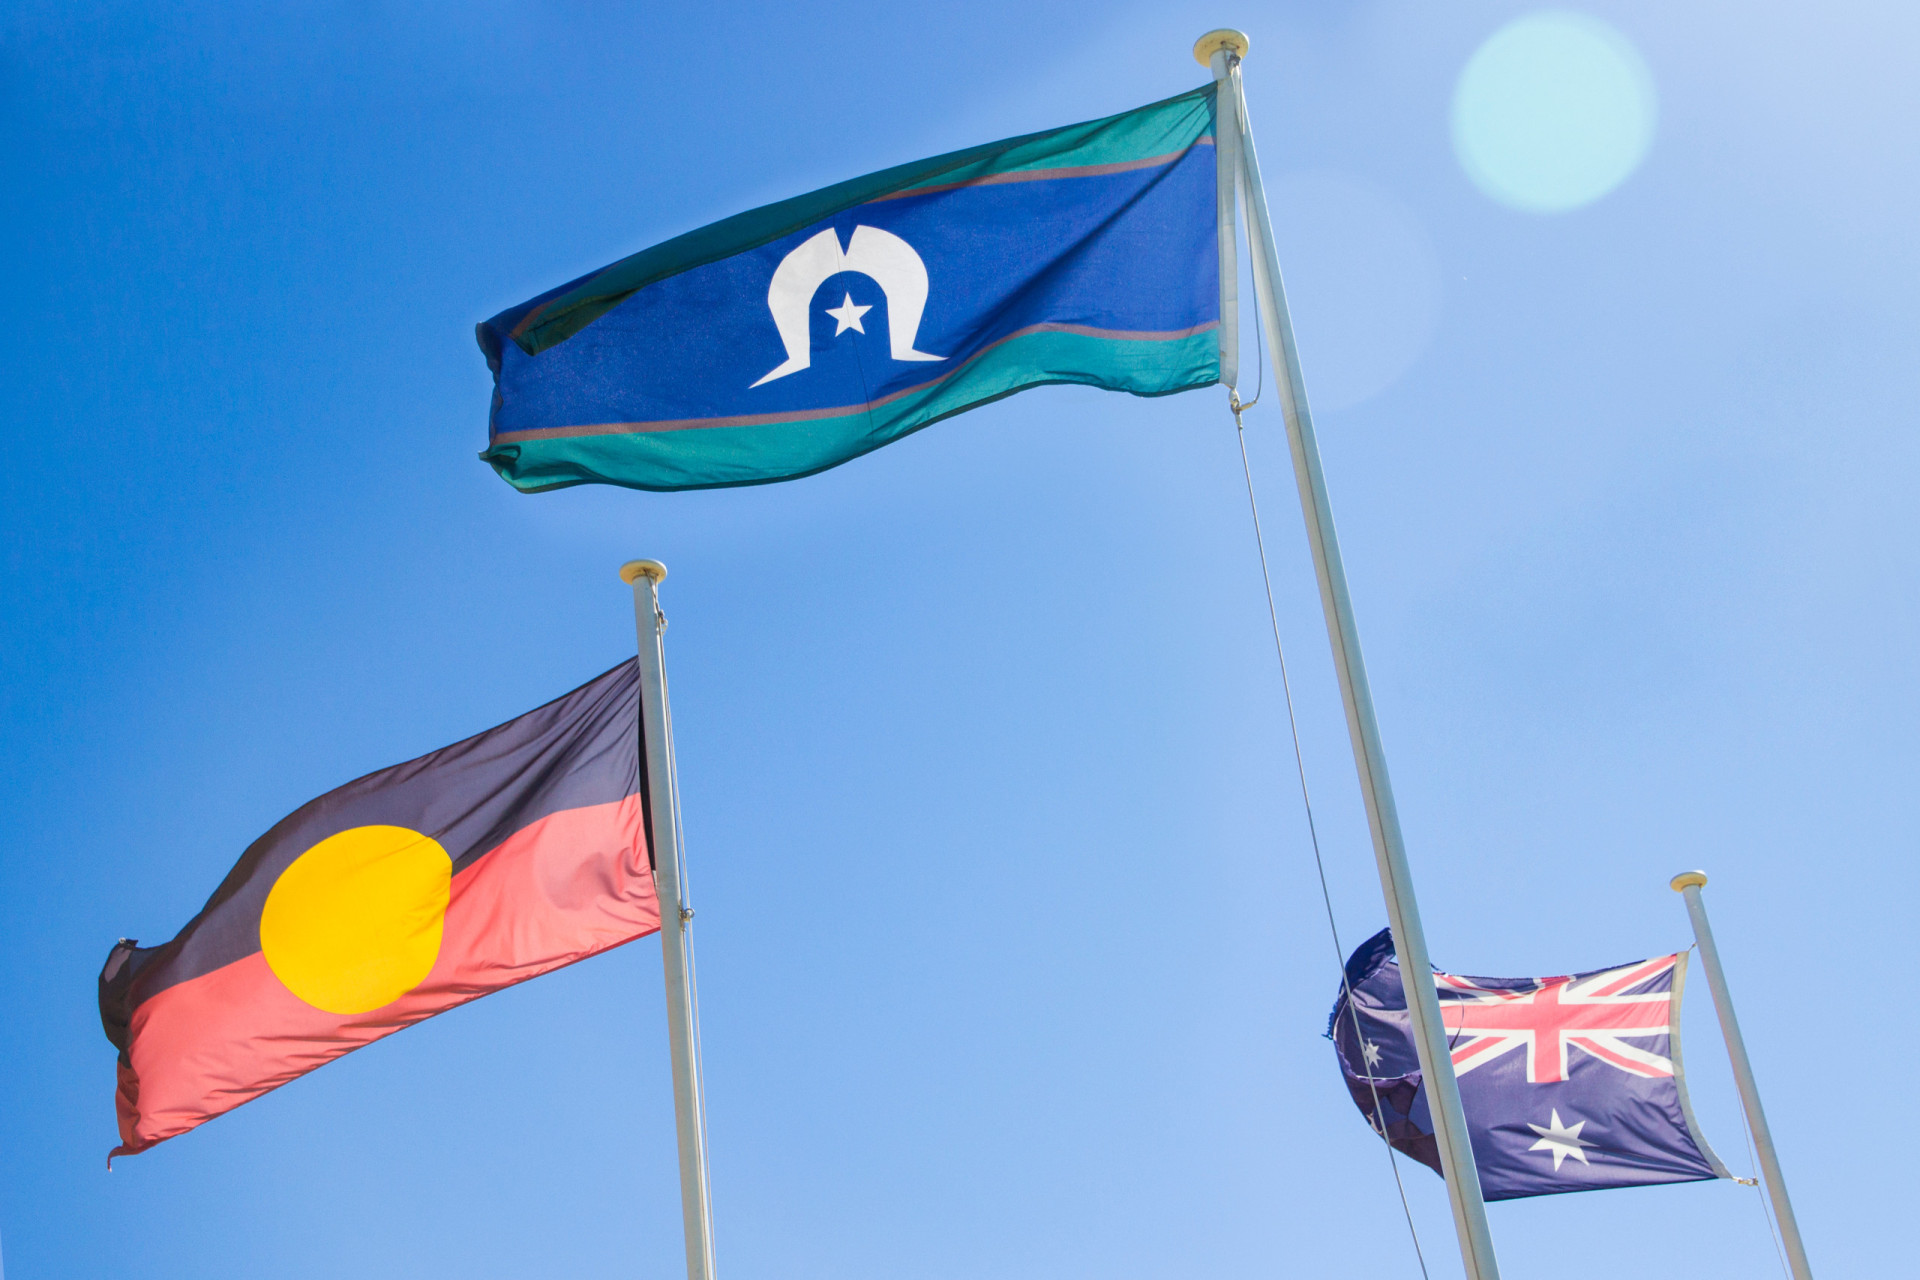 <p>The Australian Aboriginal flag was designed in 1970, while the Torres Strait Island flag was created in 1992. Both are official flags of Australia.</p><p>You may also like:<a href="https://www.starsinsider.com/n/246846?utm_source=msn.com&utm_medium=display&utm_campaign=referral_description&utm_content=722683en-us"> These gorgeous actresses are in their 70s and beyond </a></p>